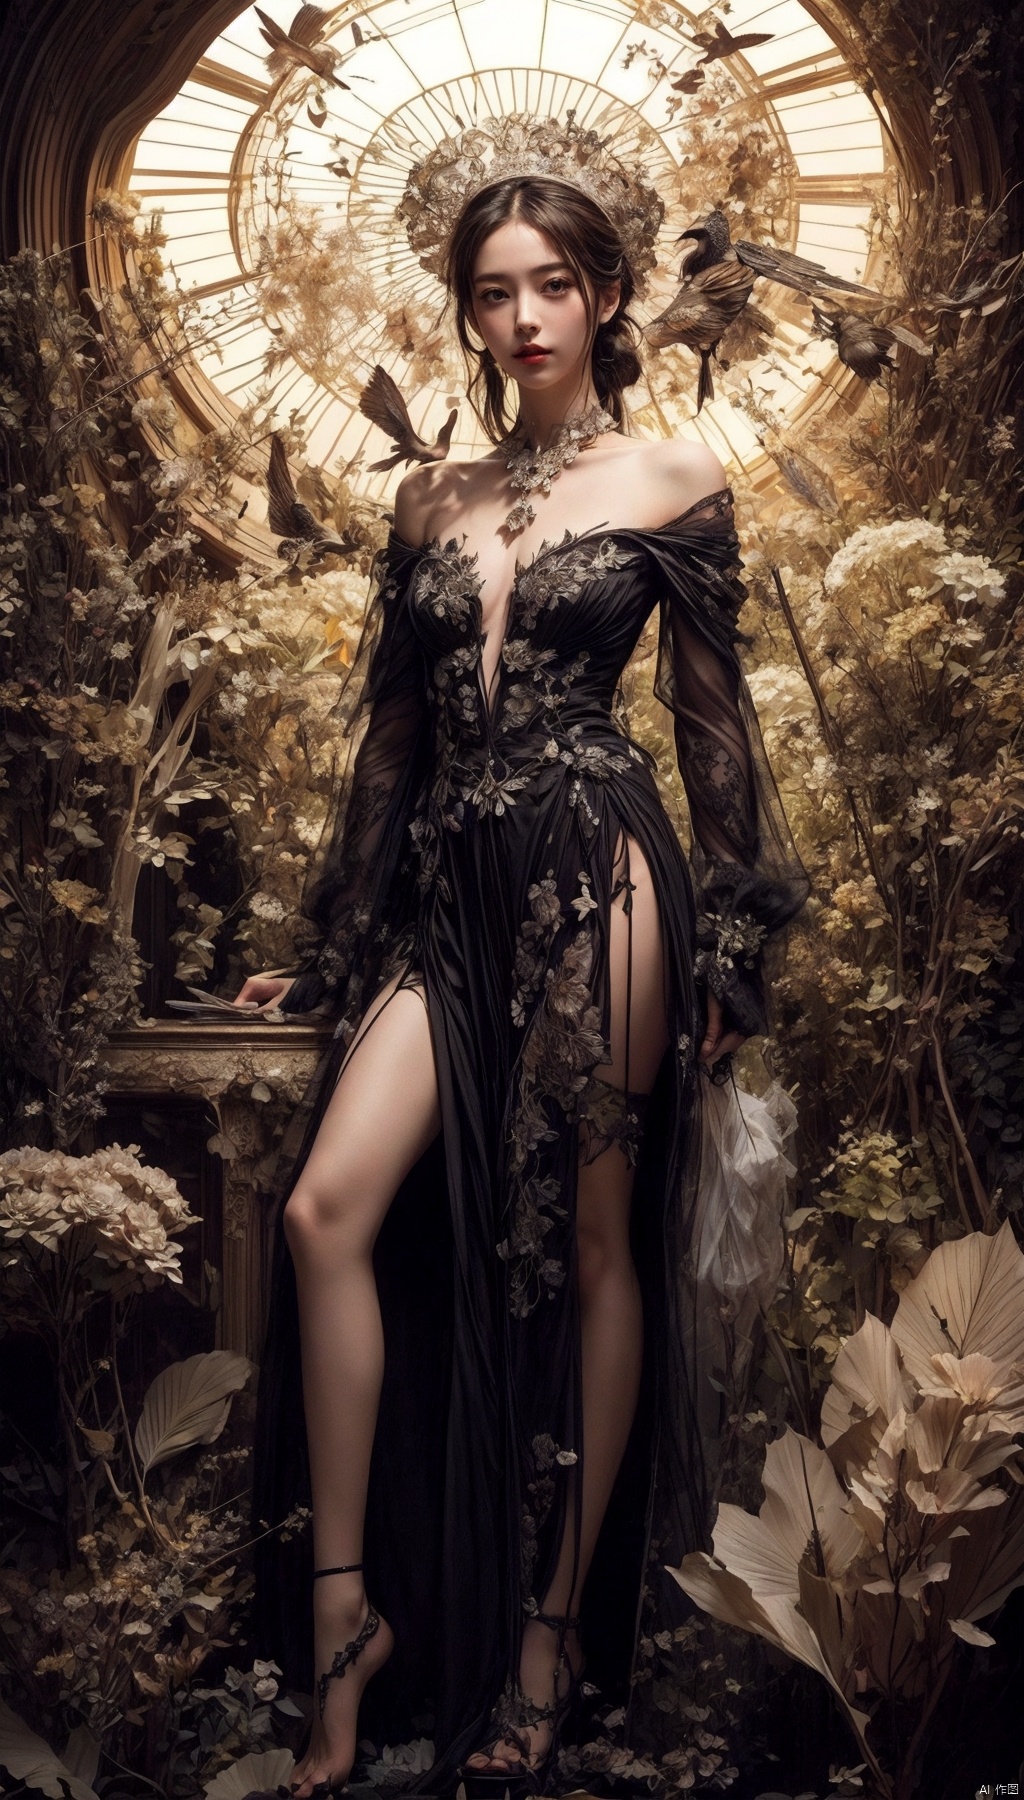  Queen, holding a long sword, a perfect long sword, a straight sword, Full body display, leaning against the ruins, with a floating skeleton in the background. The Queen's expression is enchanting, her posture is seductive, her hand is holding her face, and there is a flicker of evil energy runes in the background, blood mist filled, and soft light. My feet are covered in bones. Skeletons, many skeletons. Black stockings. Official art, unit 8 k wallpaper, ultra detailed, beautiful and aesthetic, masterpiece, best quality, extremely detailed, dynamic angle, paper skin, radius, iuminosity, cowboyshot, the most beautiful form of Chaos, elegant, a brutalist designed, visual colors, romanticism, by James Jean, roby dwi antono, cross tran, francis bacon, Michael mraz, Adrian ghenie, Petra cortright, Gerhard richter, Takato yamamoto, ashley wood, atmospheric, ecstasy of musical notes, streaming musical notes visible, flowers in full bloom, many bird of parade, deep forests, sunlight, atmosphere, rich details, full body lens, shot from above, shot from below, detail background, beautiful sky, floating hair, perfect face, exquisite facial features, high detail, smile, Fisheye lens, dynamic angle, dynamic posture, ((poakl))